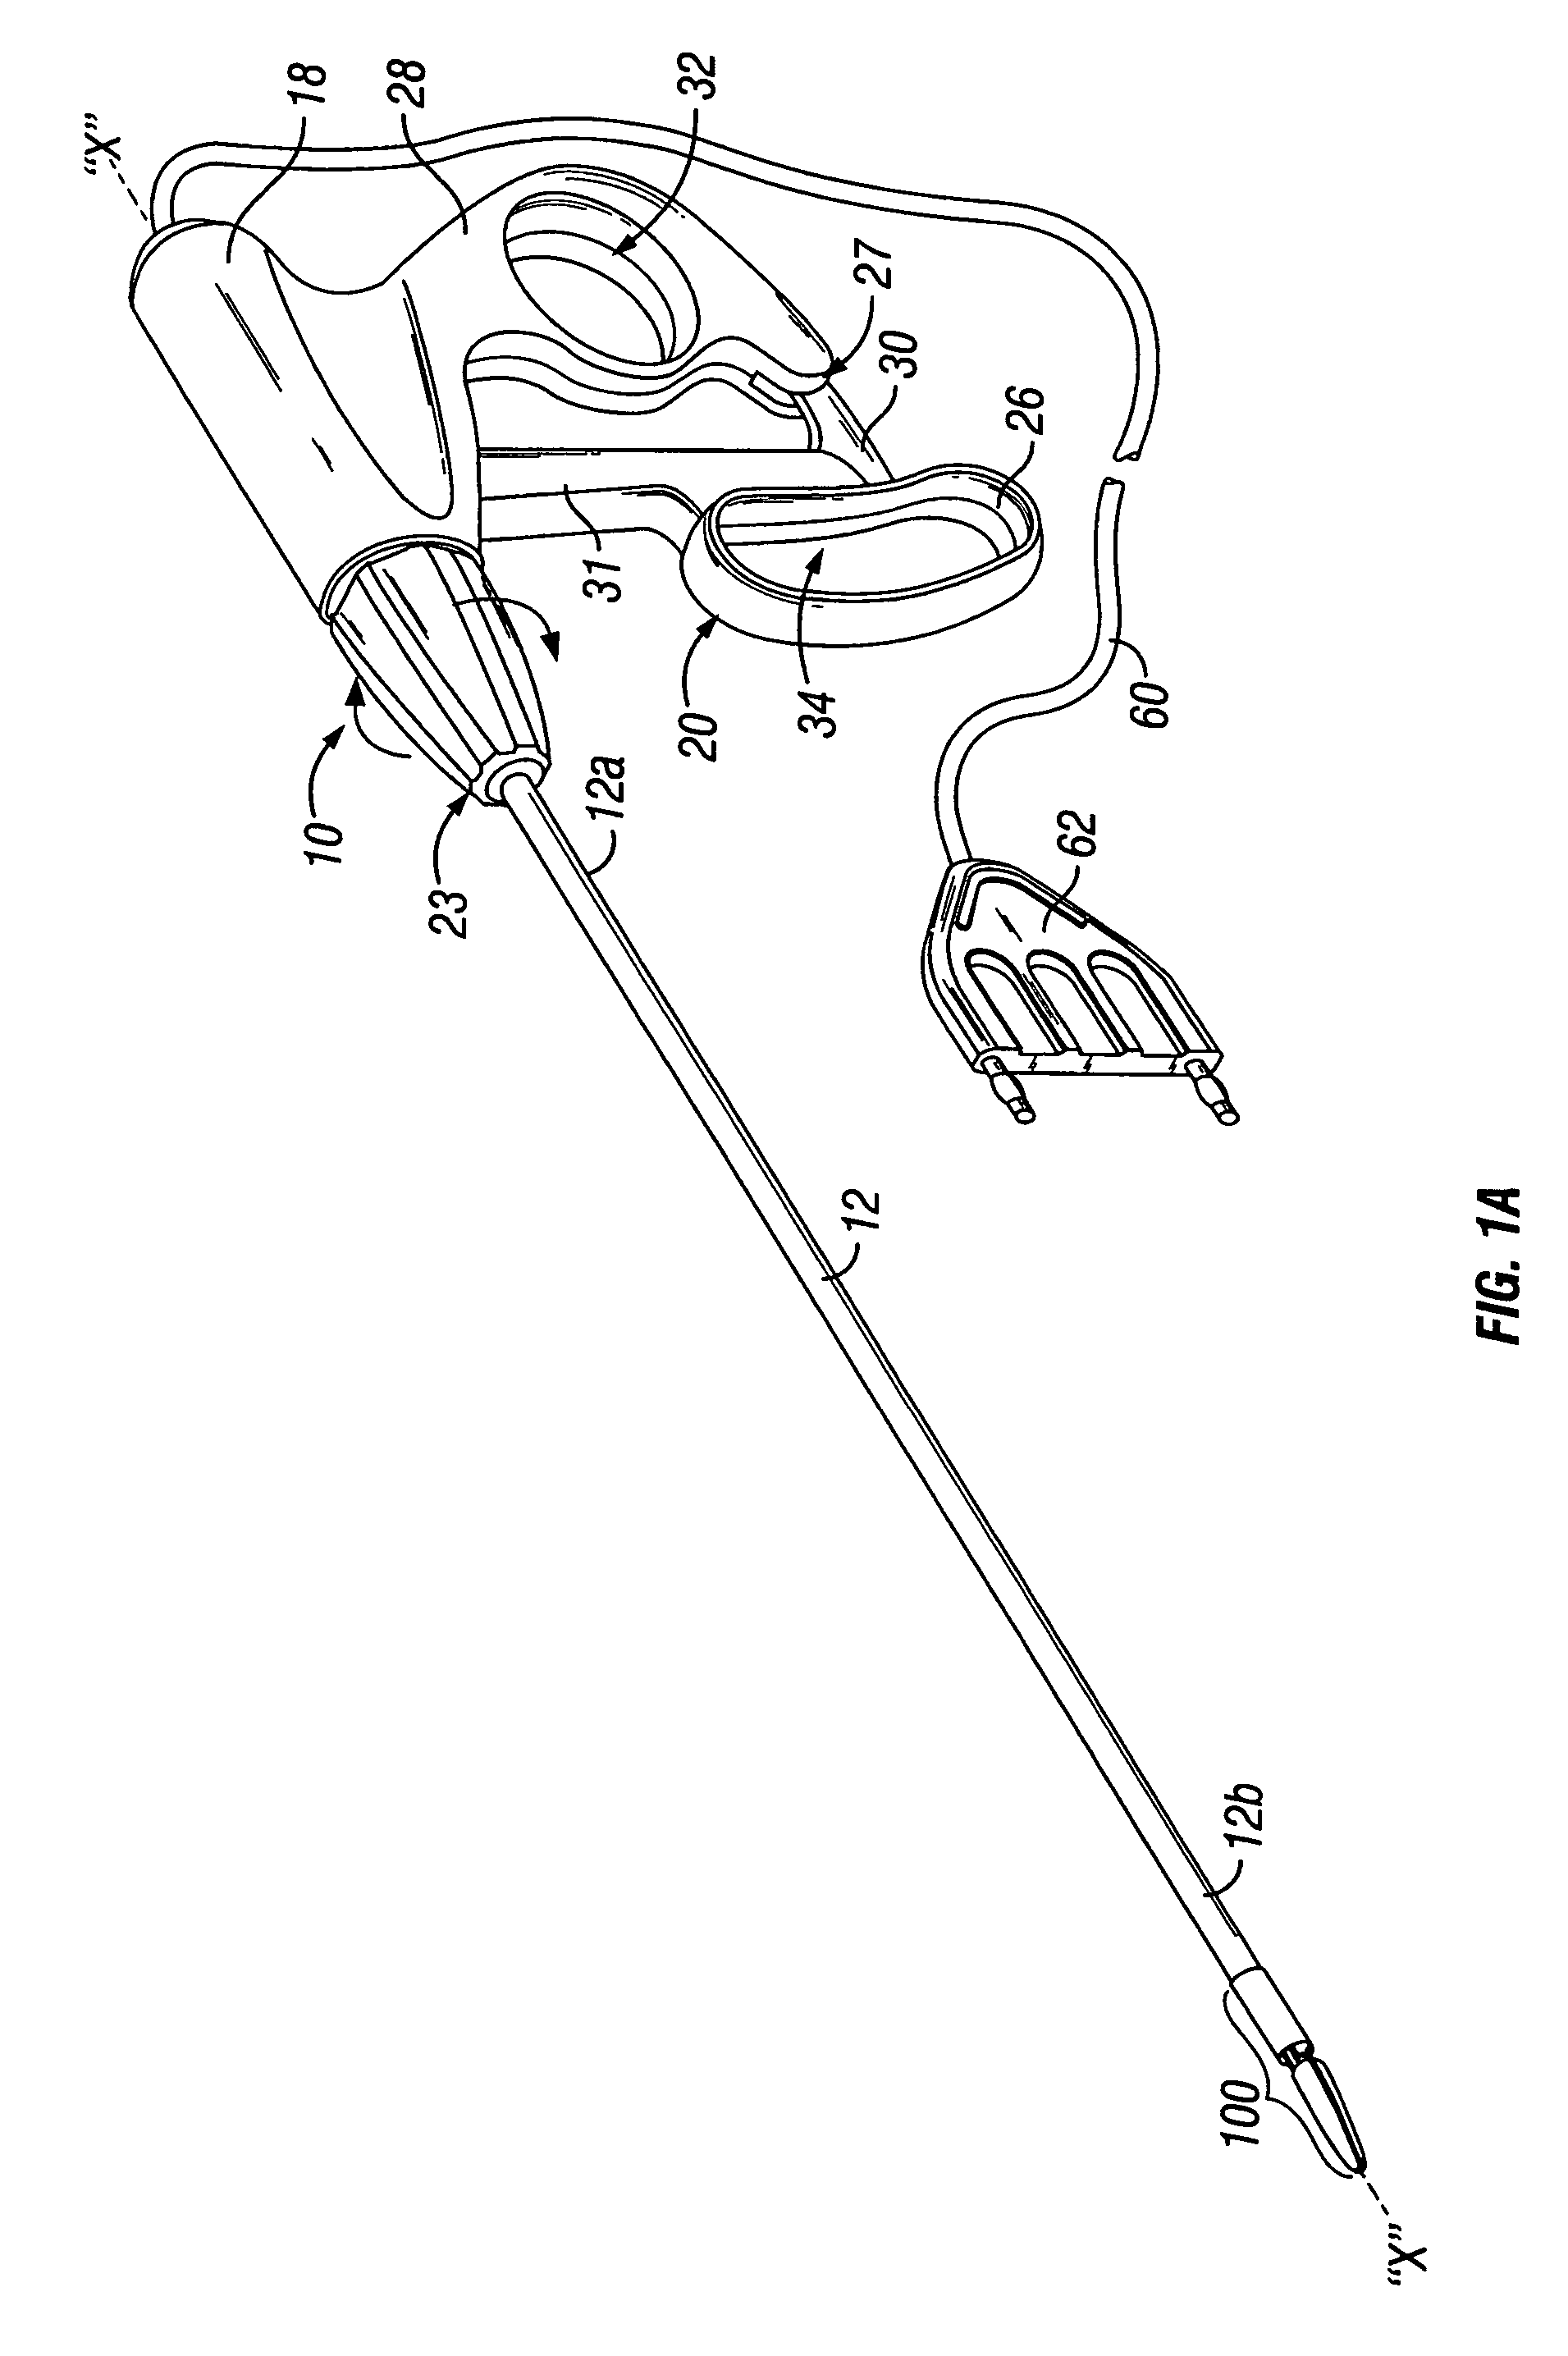 Forceps with spring loaded end effector assembly